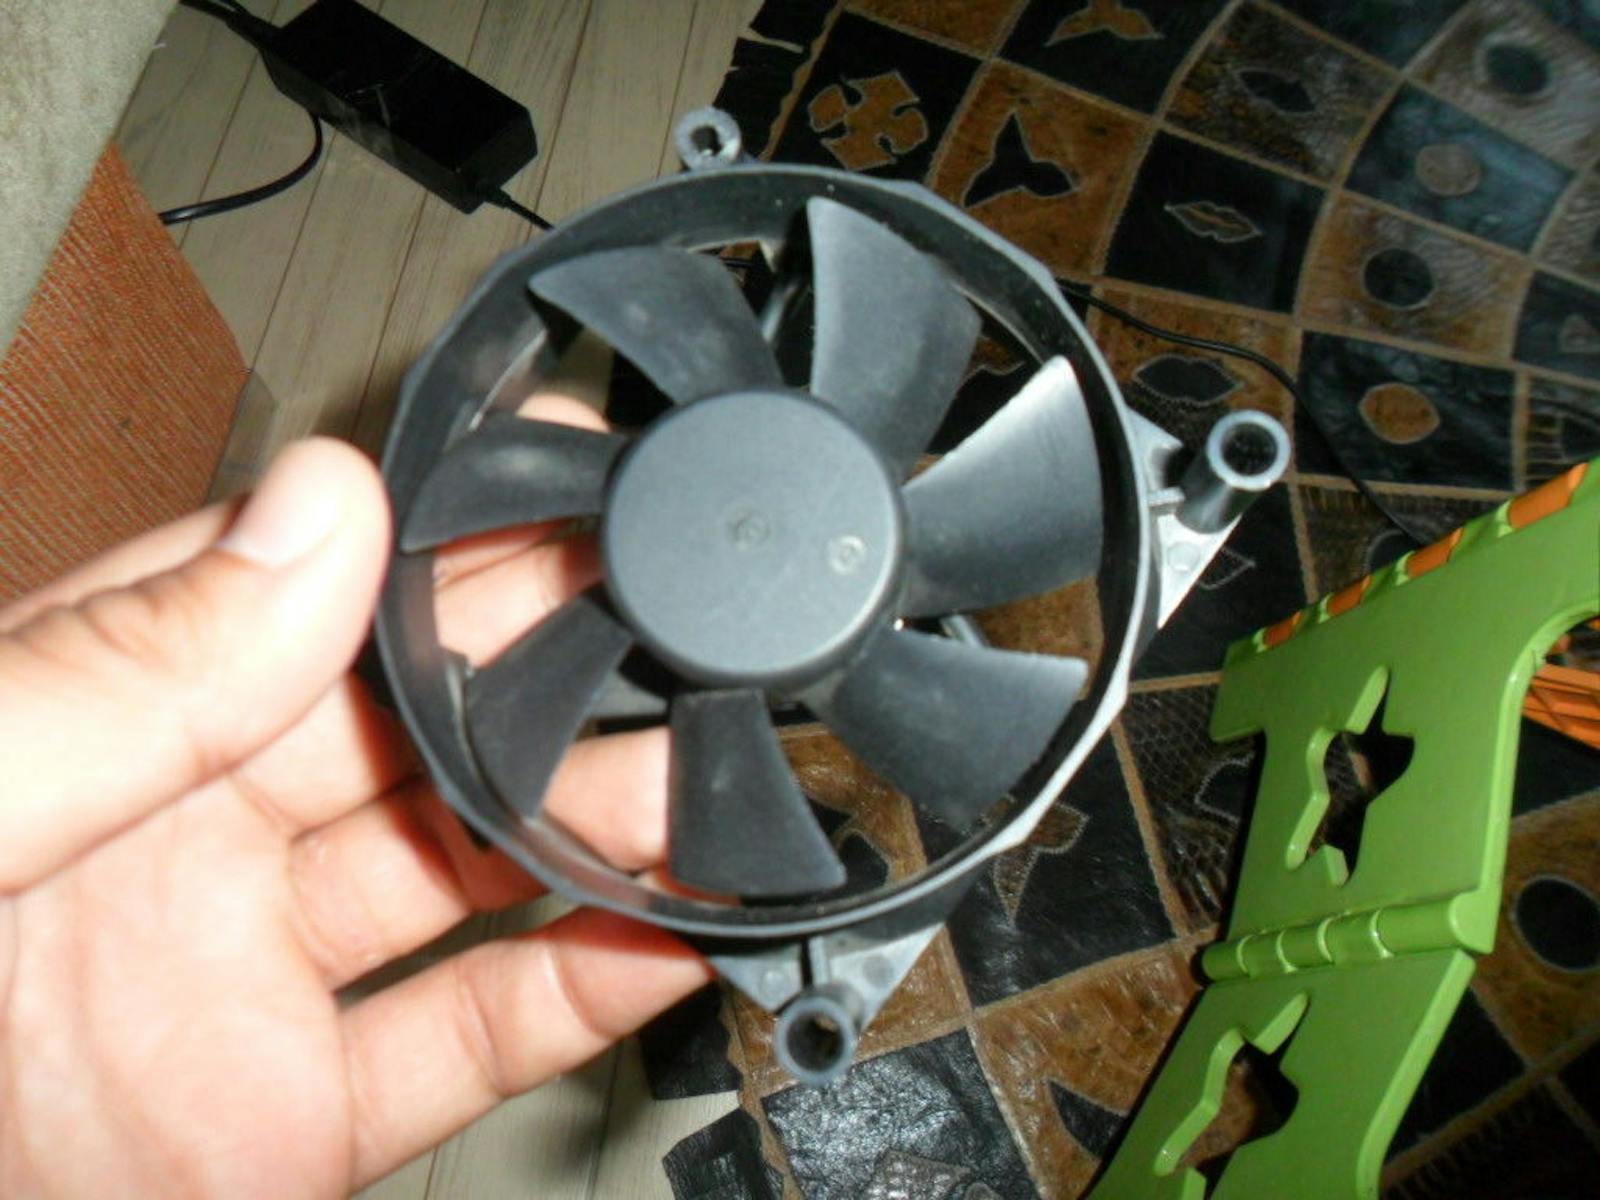 Turn Your Old PC Fan into a Generator 10 Minutes - Hackster.io